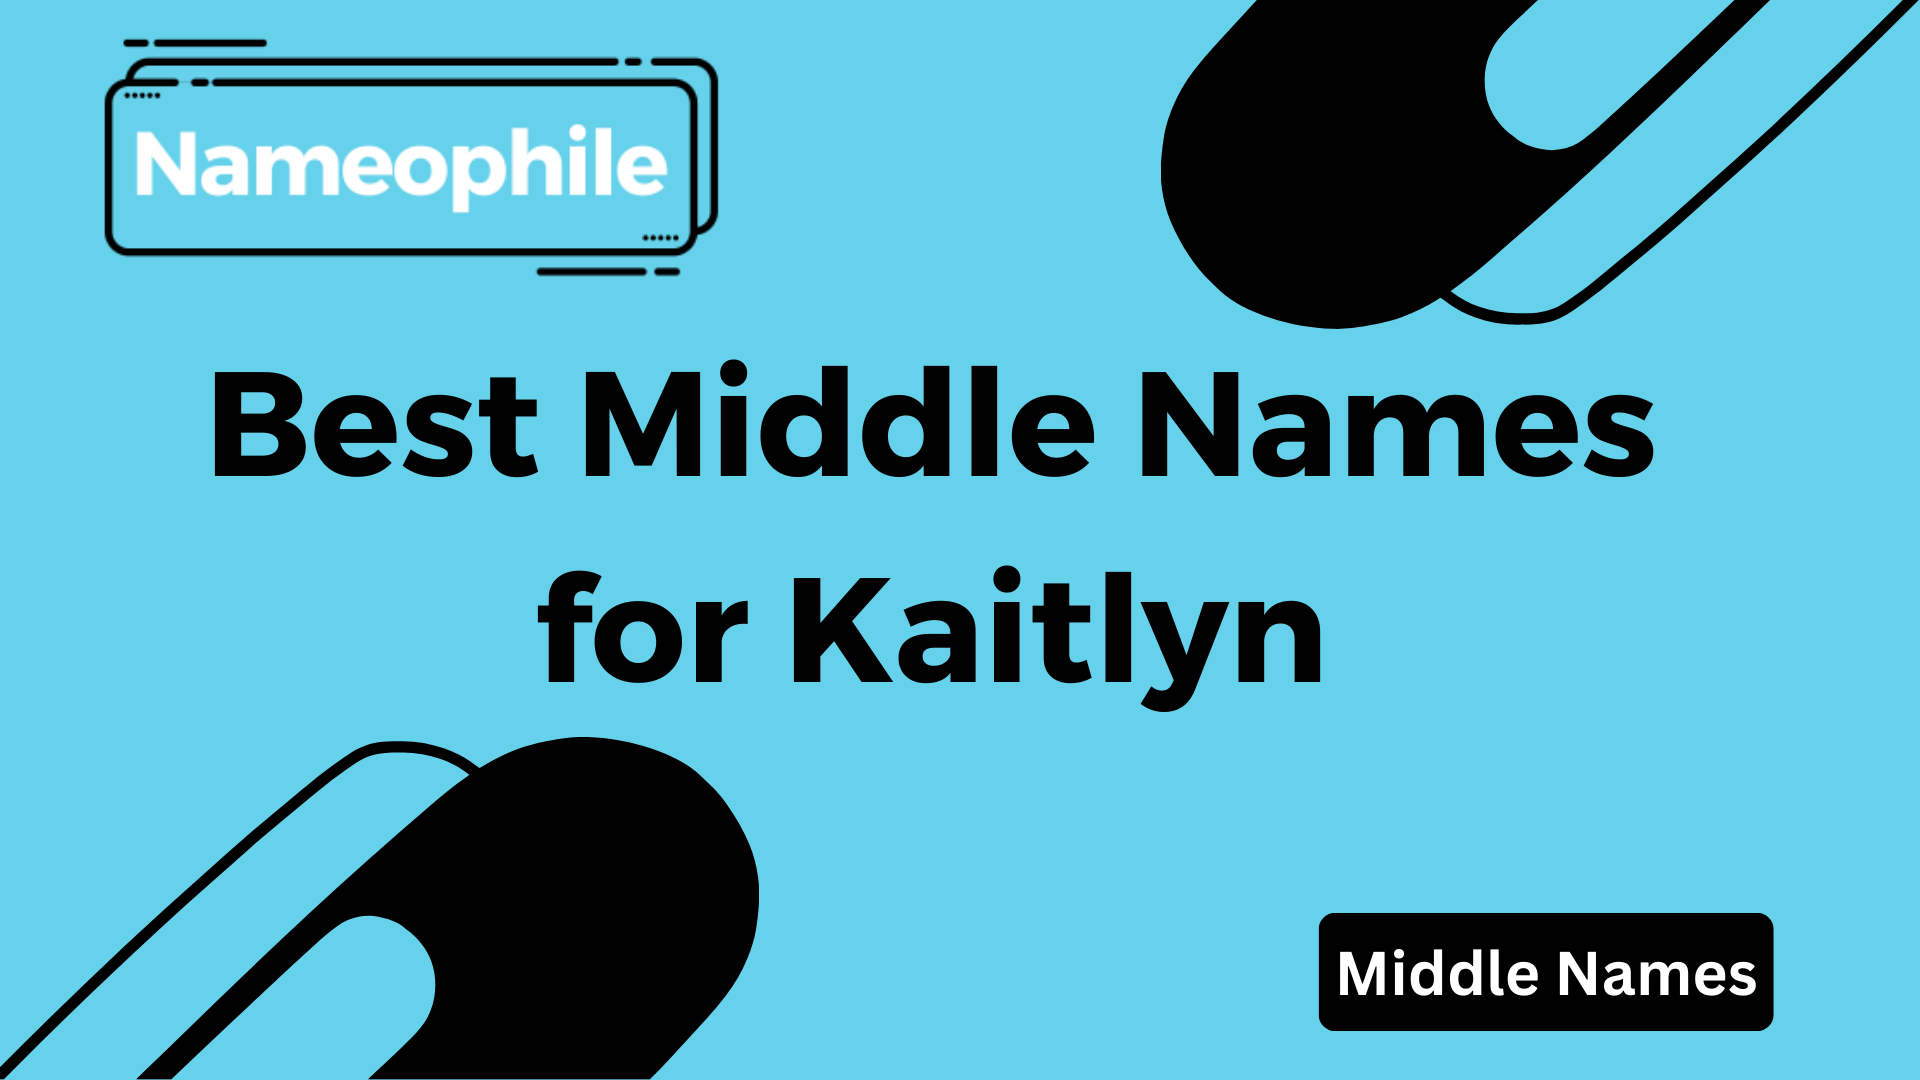 Best Middle Names for Kaitlyn